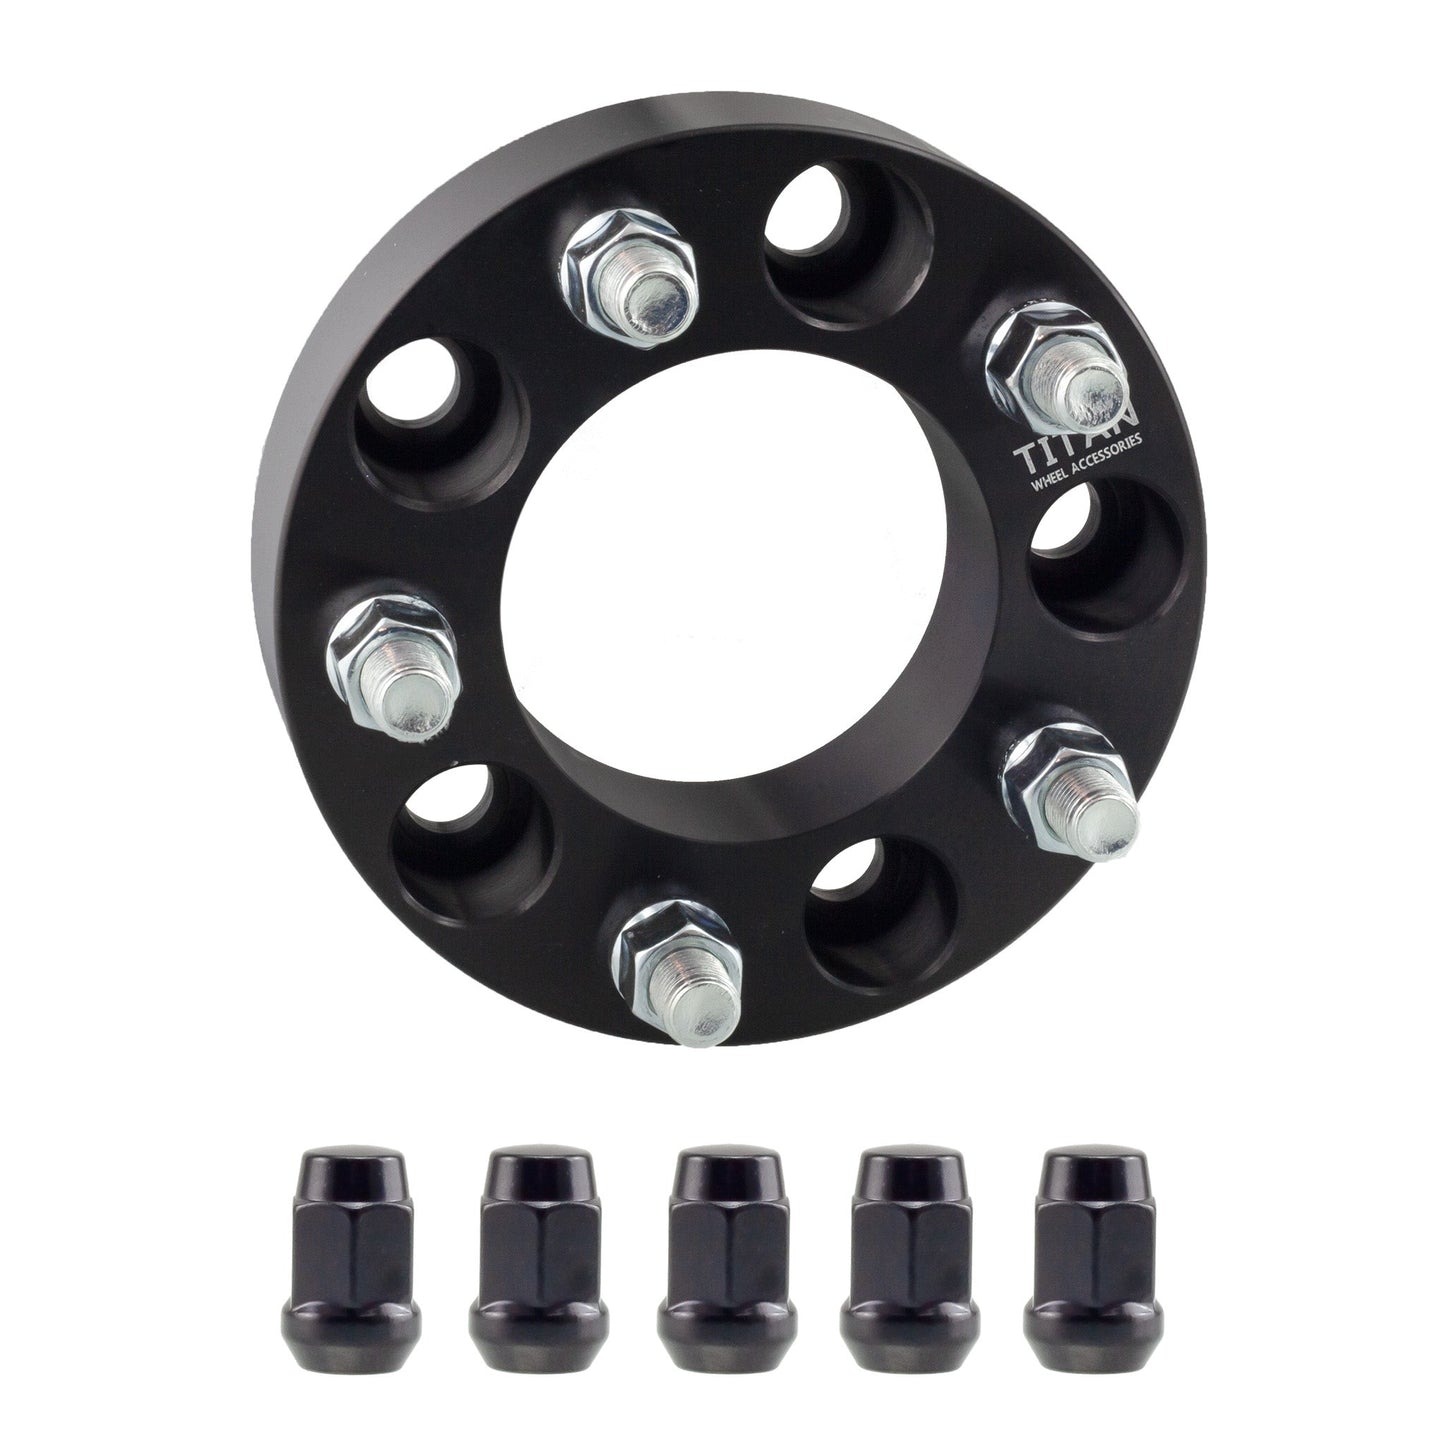 15mm Titan Wheel Spacers for Jeep Compass Patriot Prospector | 5x114.3 (5x4.5) | 67.1 Hubcentric |12x1.5 Studs | Titan Wheel Accessories